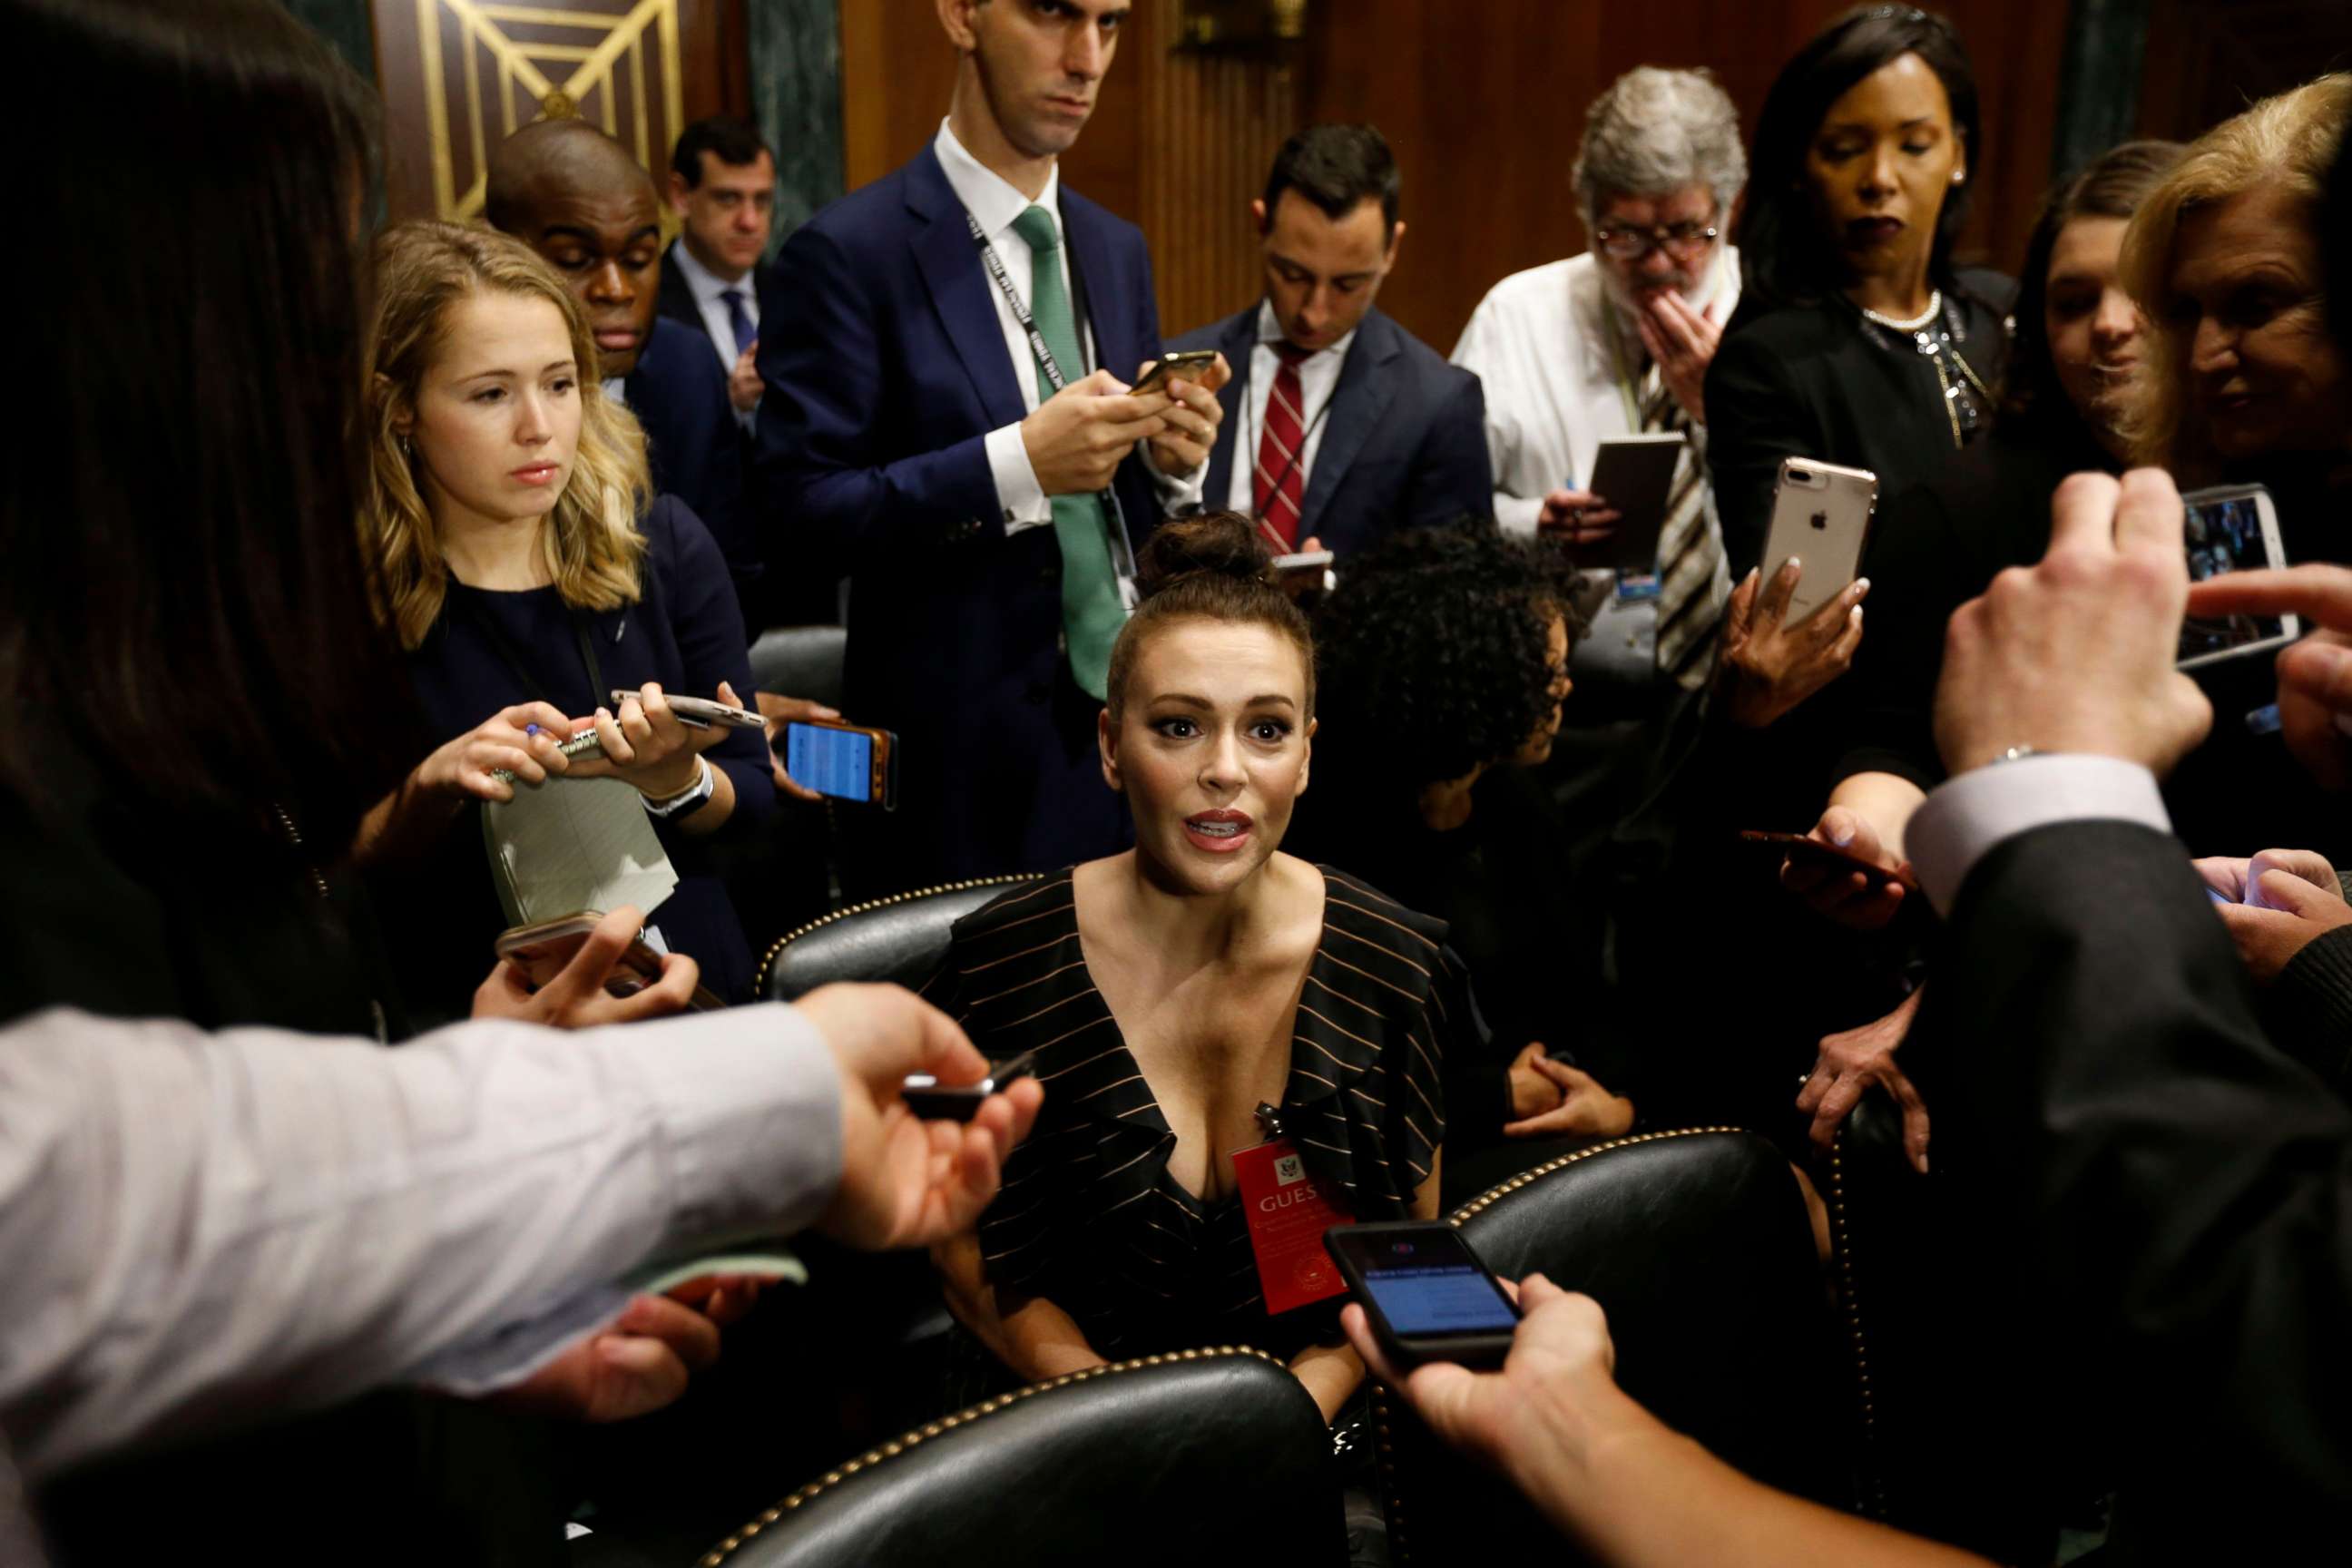 PHOTO: Actress Alyssa Milano talks to media before the Senate Judiciary Committee hearing on the nomination of Brett Kavanaugh to be an associate justice of the Supreme Court in Washington, Sept. 27, 2018.